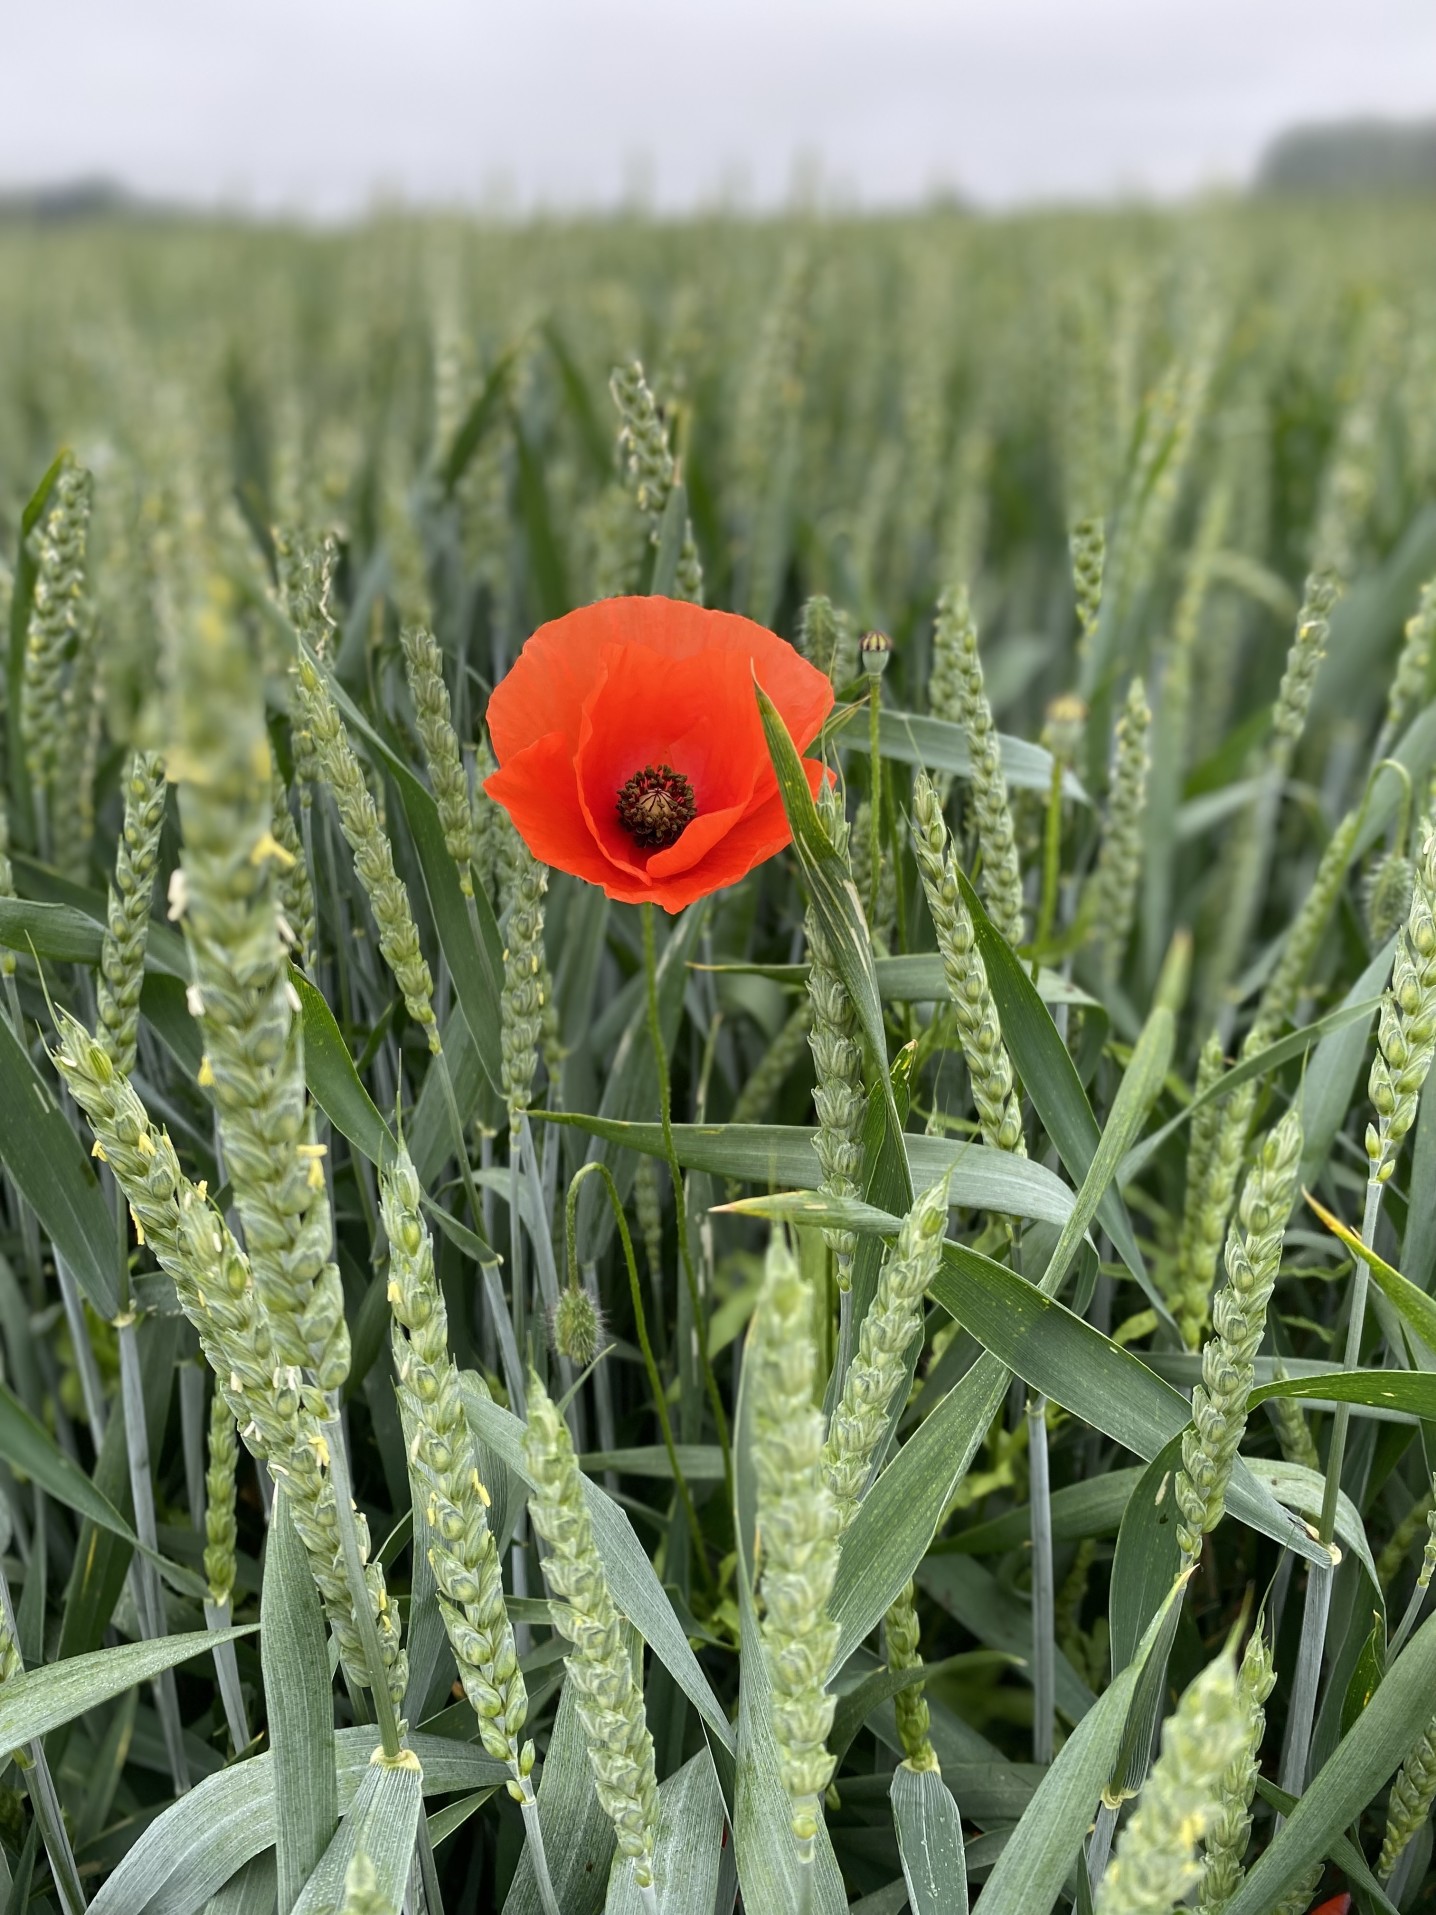 nature-wheat-poppy-red-flower-depth-of-field-wheat-field-red-poppy-red-poppy-flower-pops-of-color_t20_0dBNo2